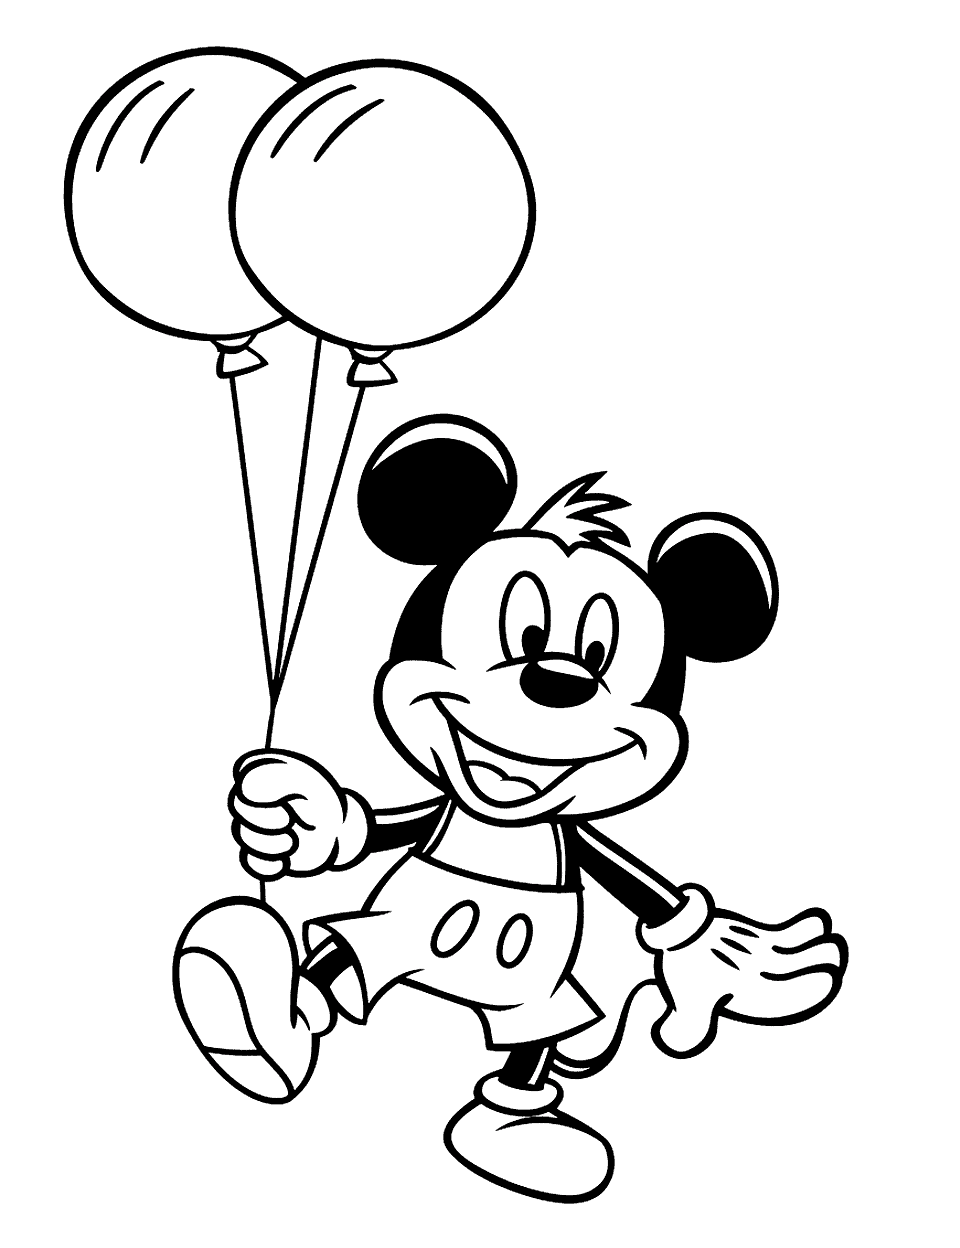 Mickey Mouse Celebration Toddler Coloring Page - Mickey Mouse holding balloons for celebration.